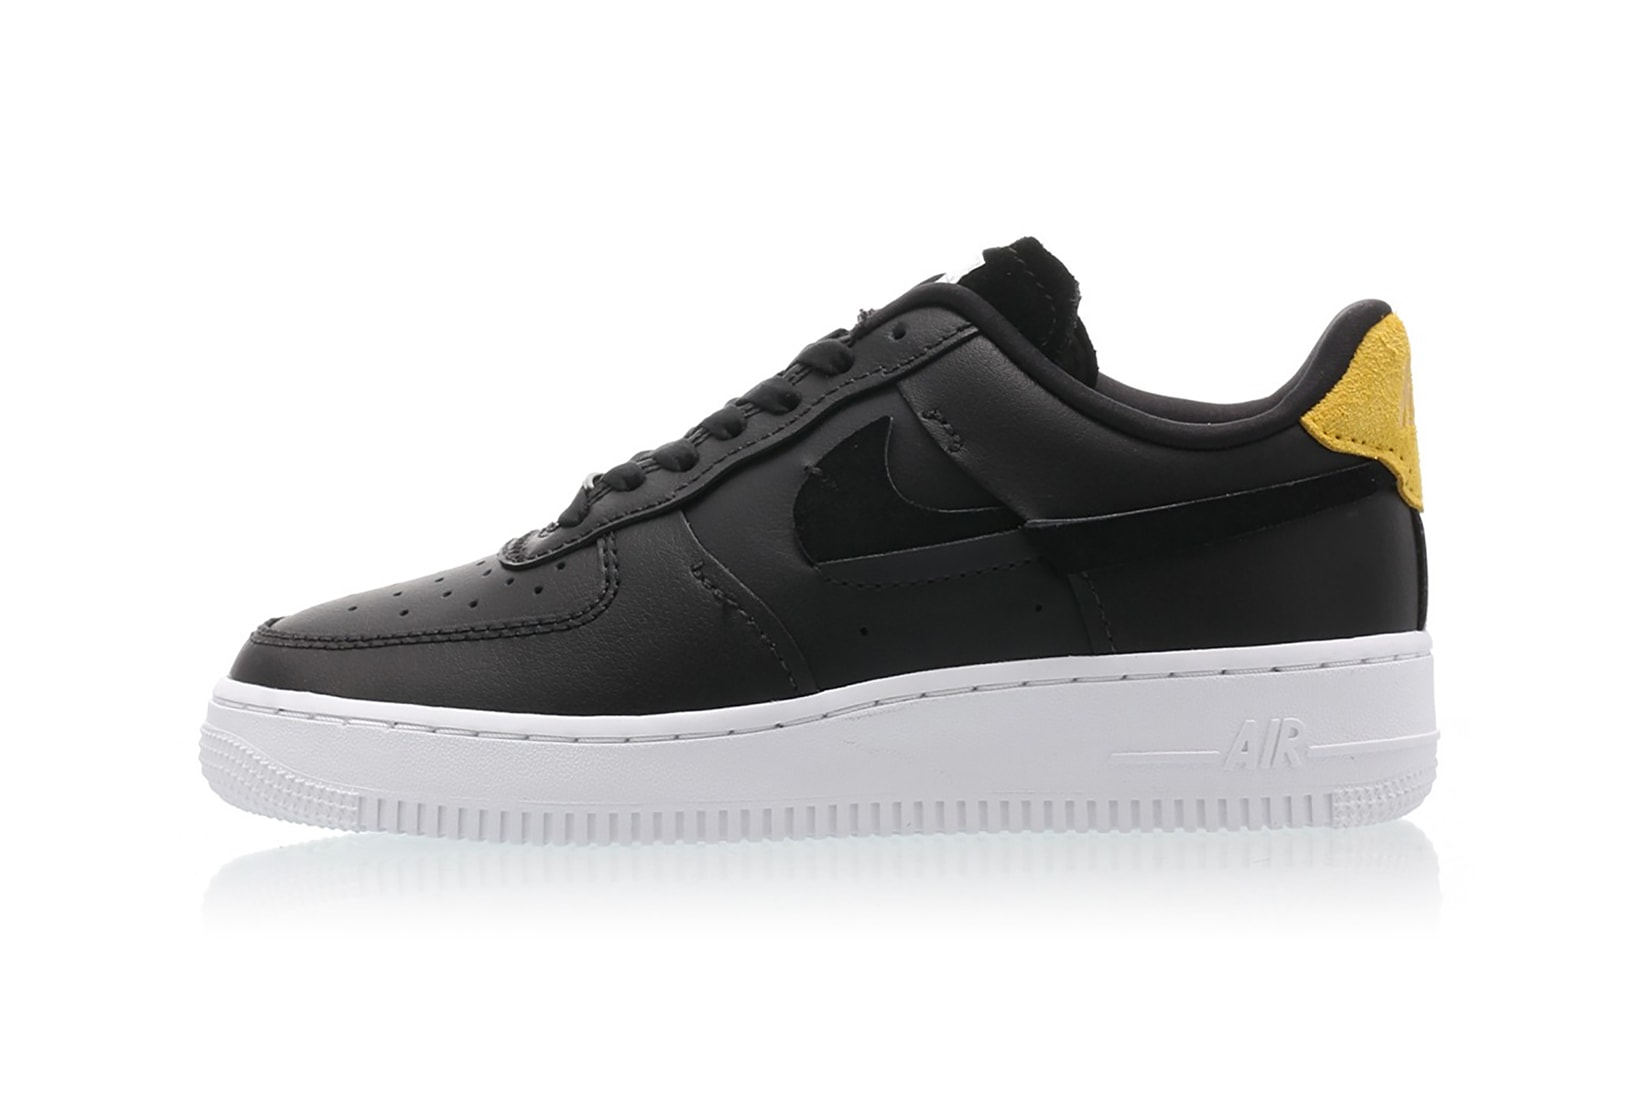 Nike Air Force 1 '07 LV8 Men's Shoes Black-Anthracite-Sail